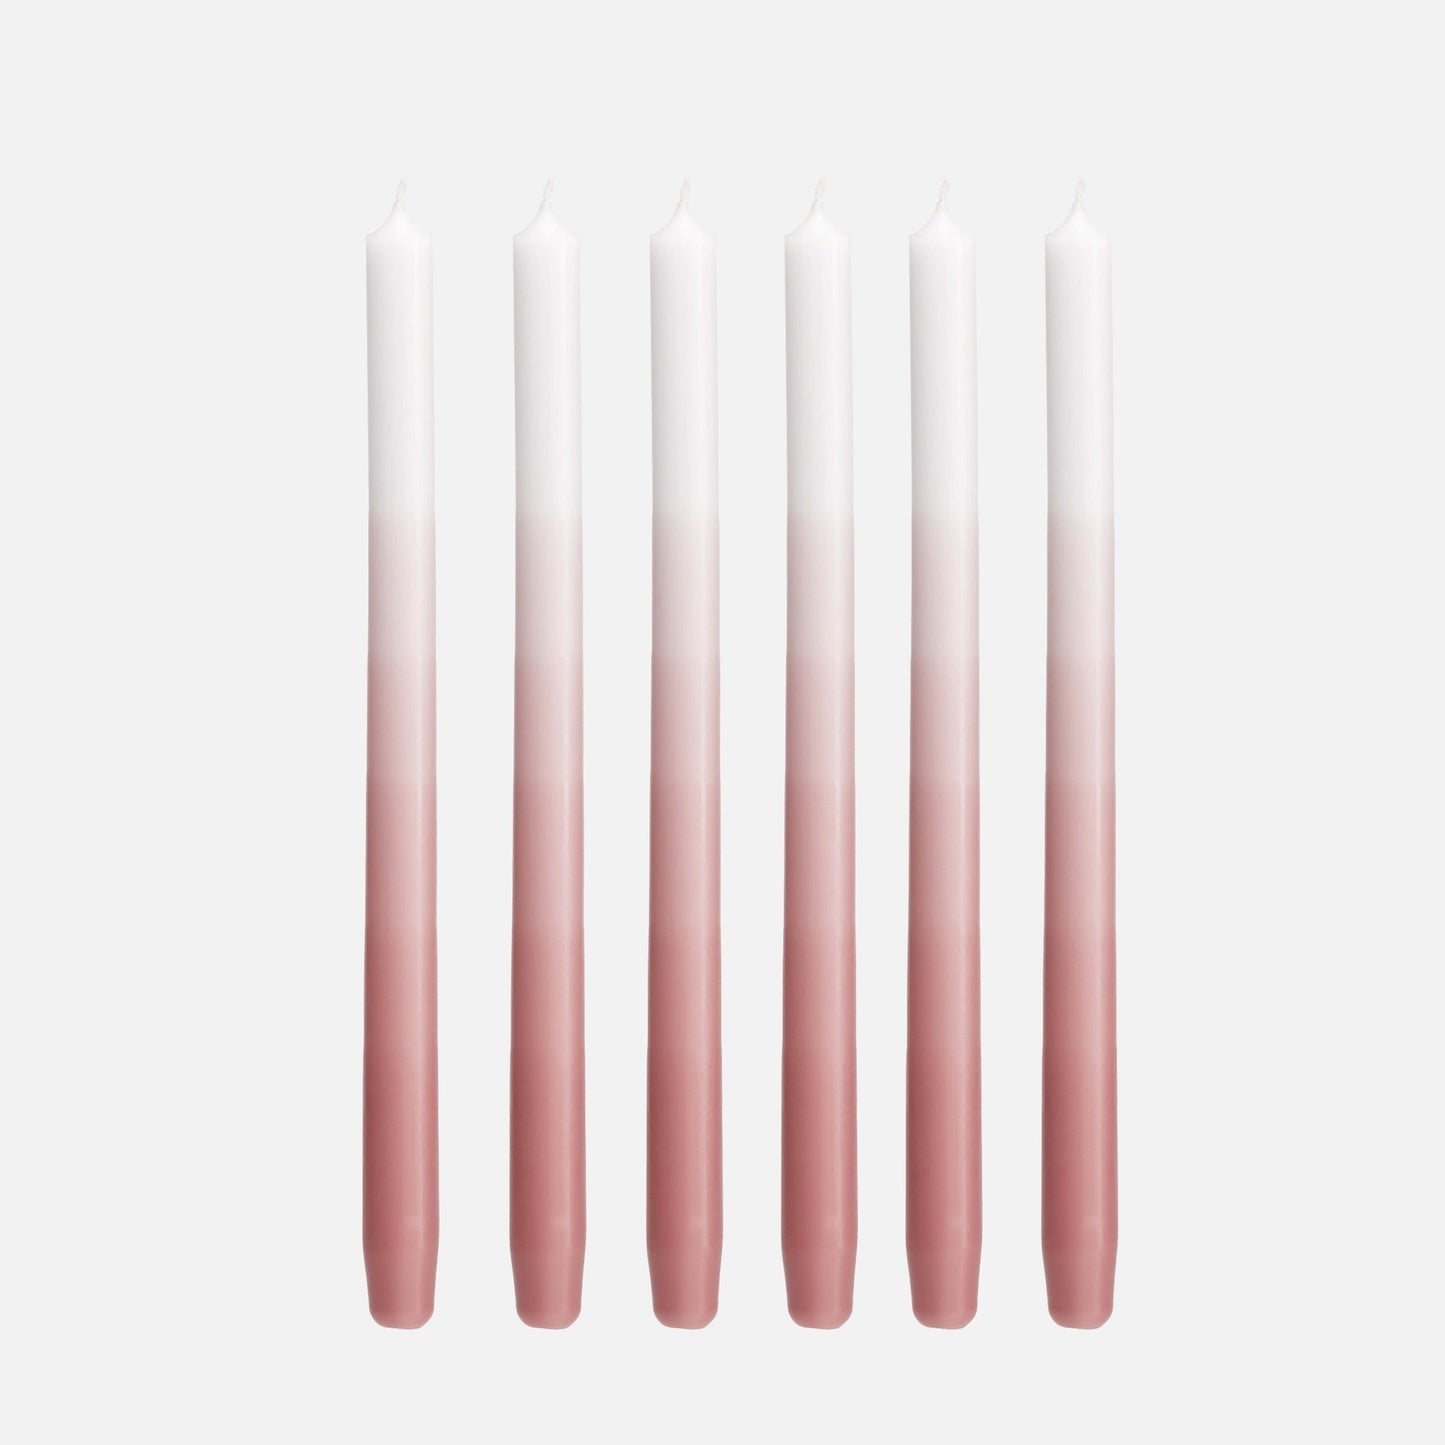 GRADIENT CANDLES | AUTUMN RED (set of 6, in a gift box)